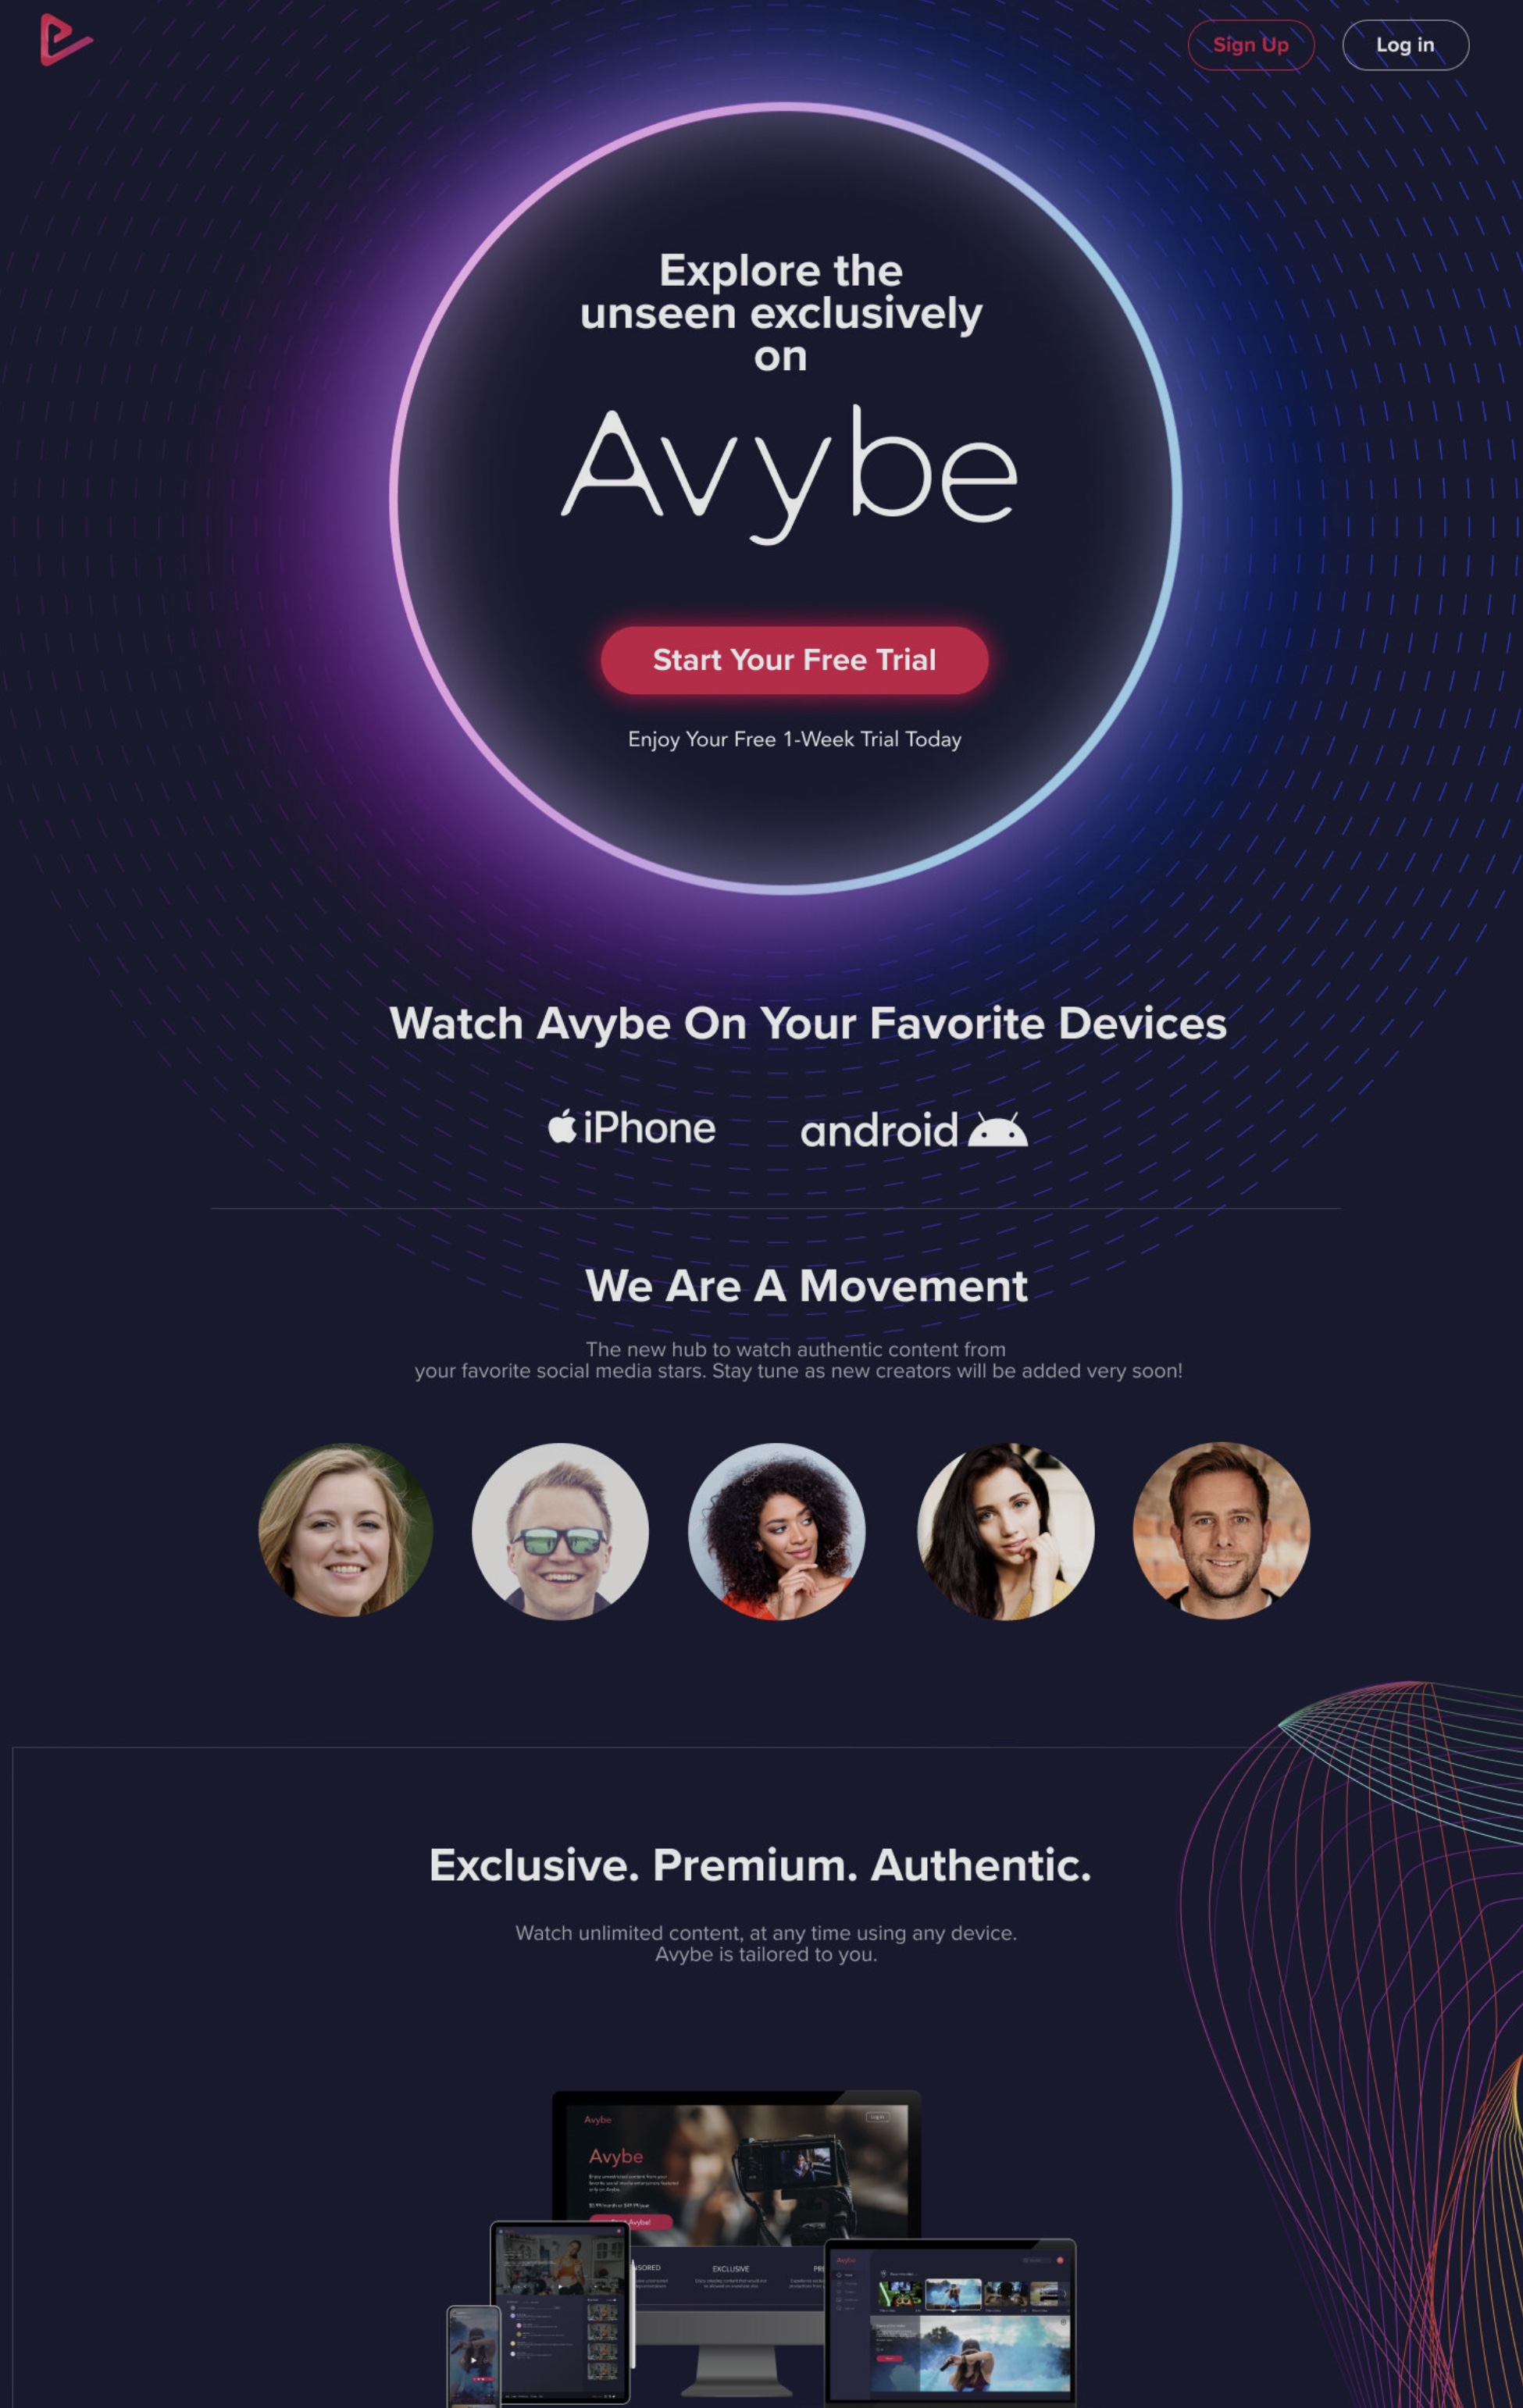 Image of the Avybe landing page